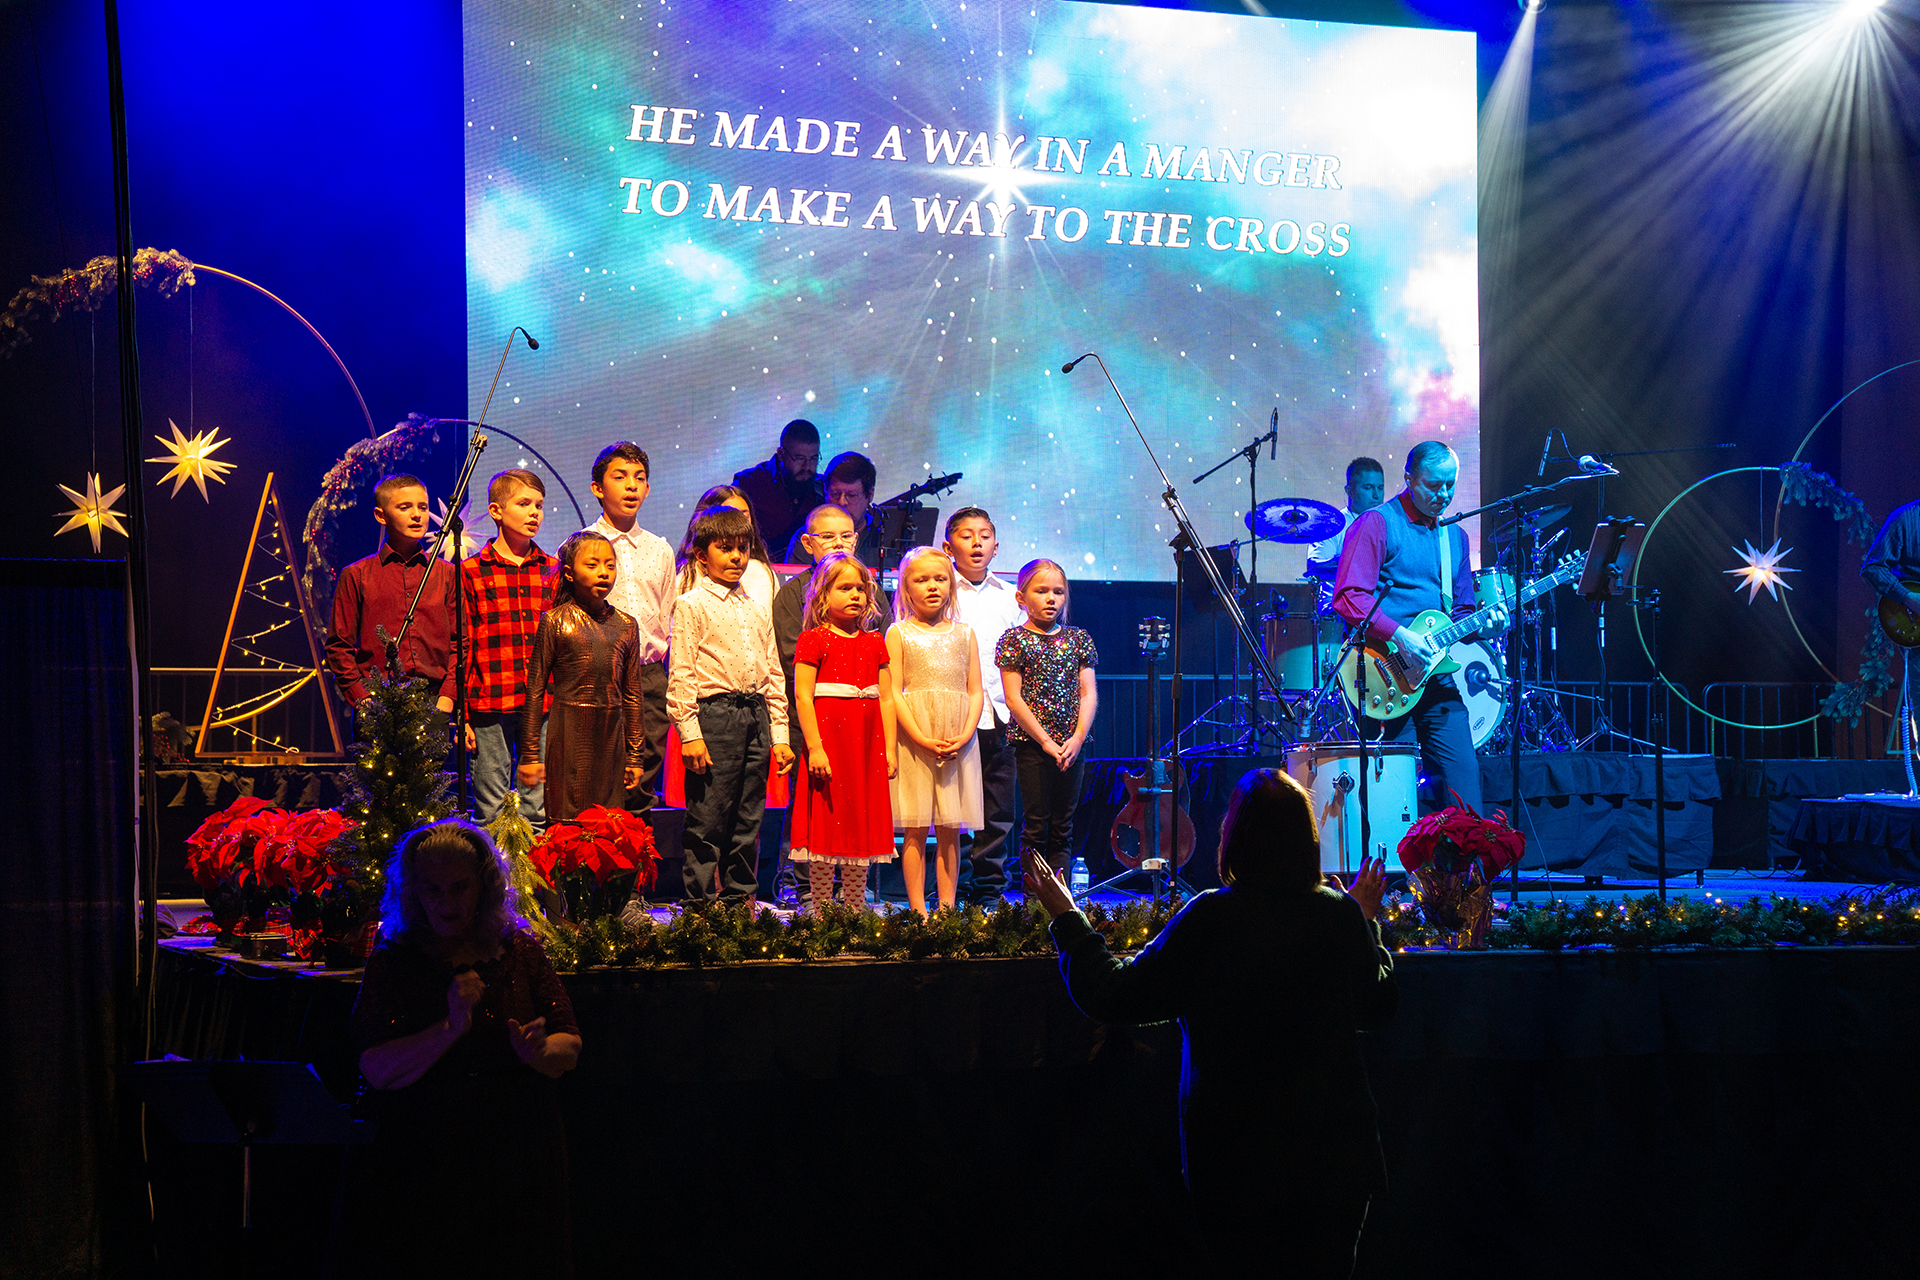 Kids Choir singing together to away in the manger